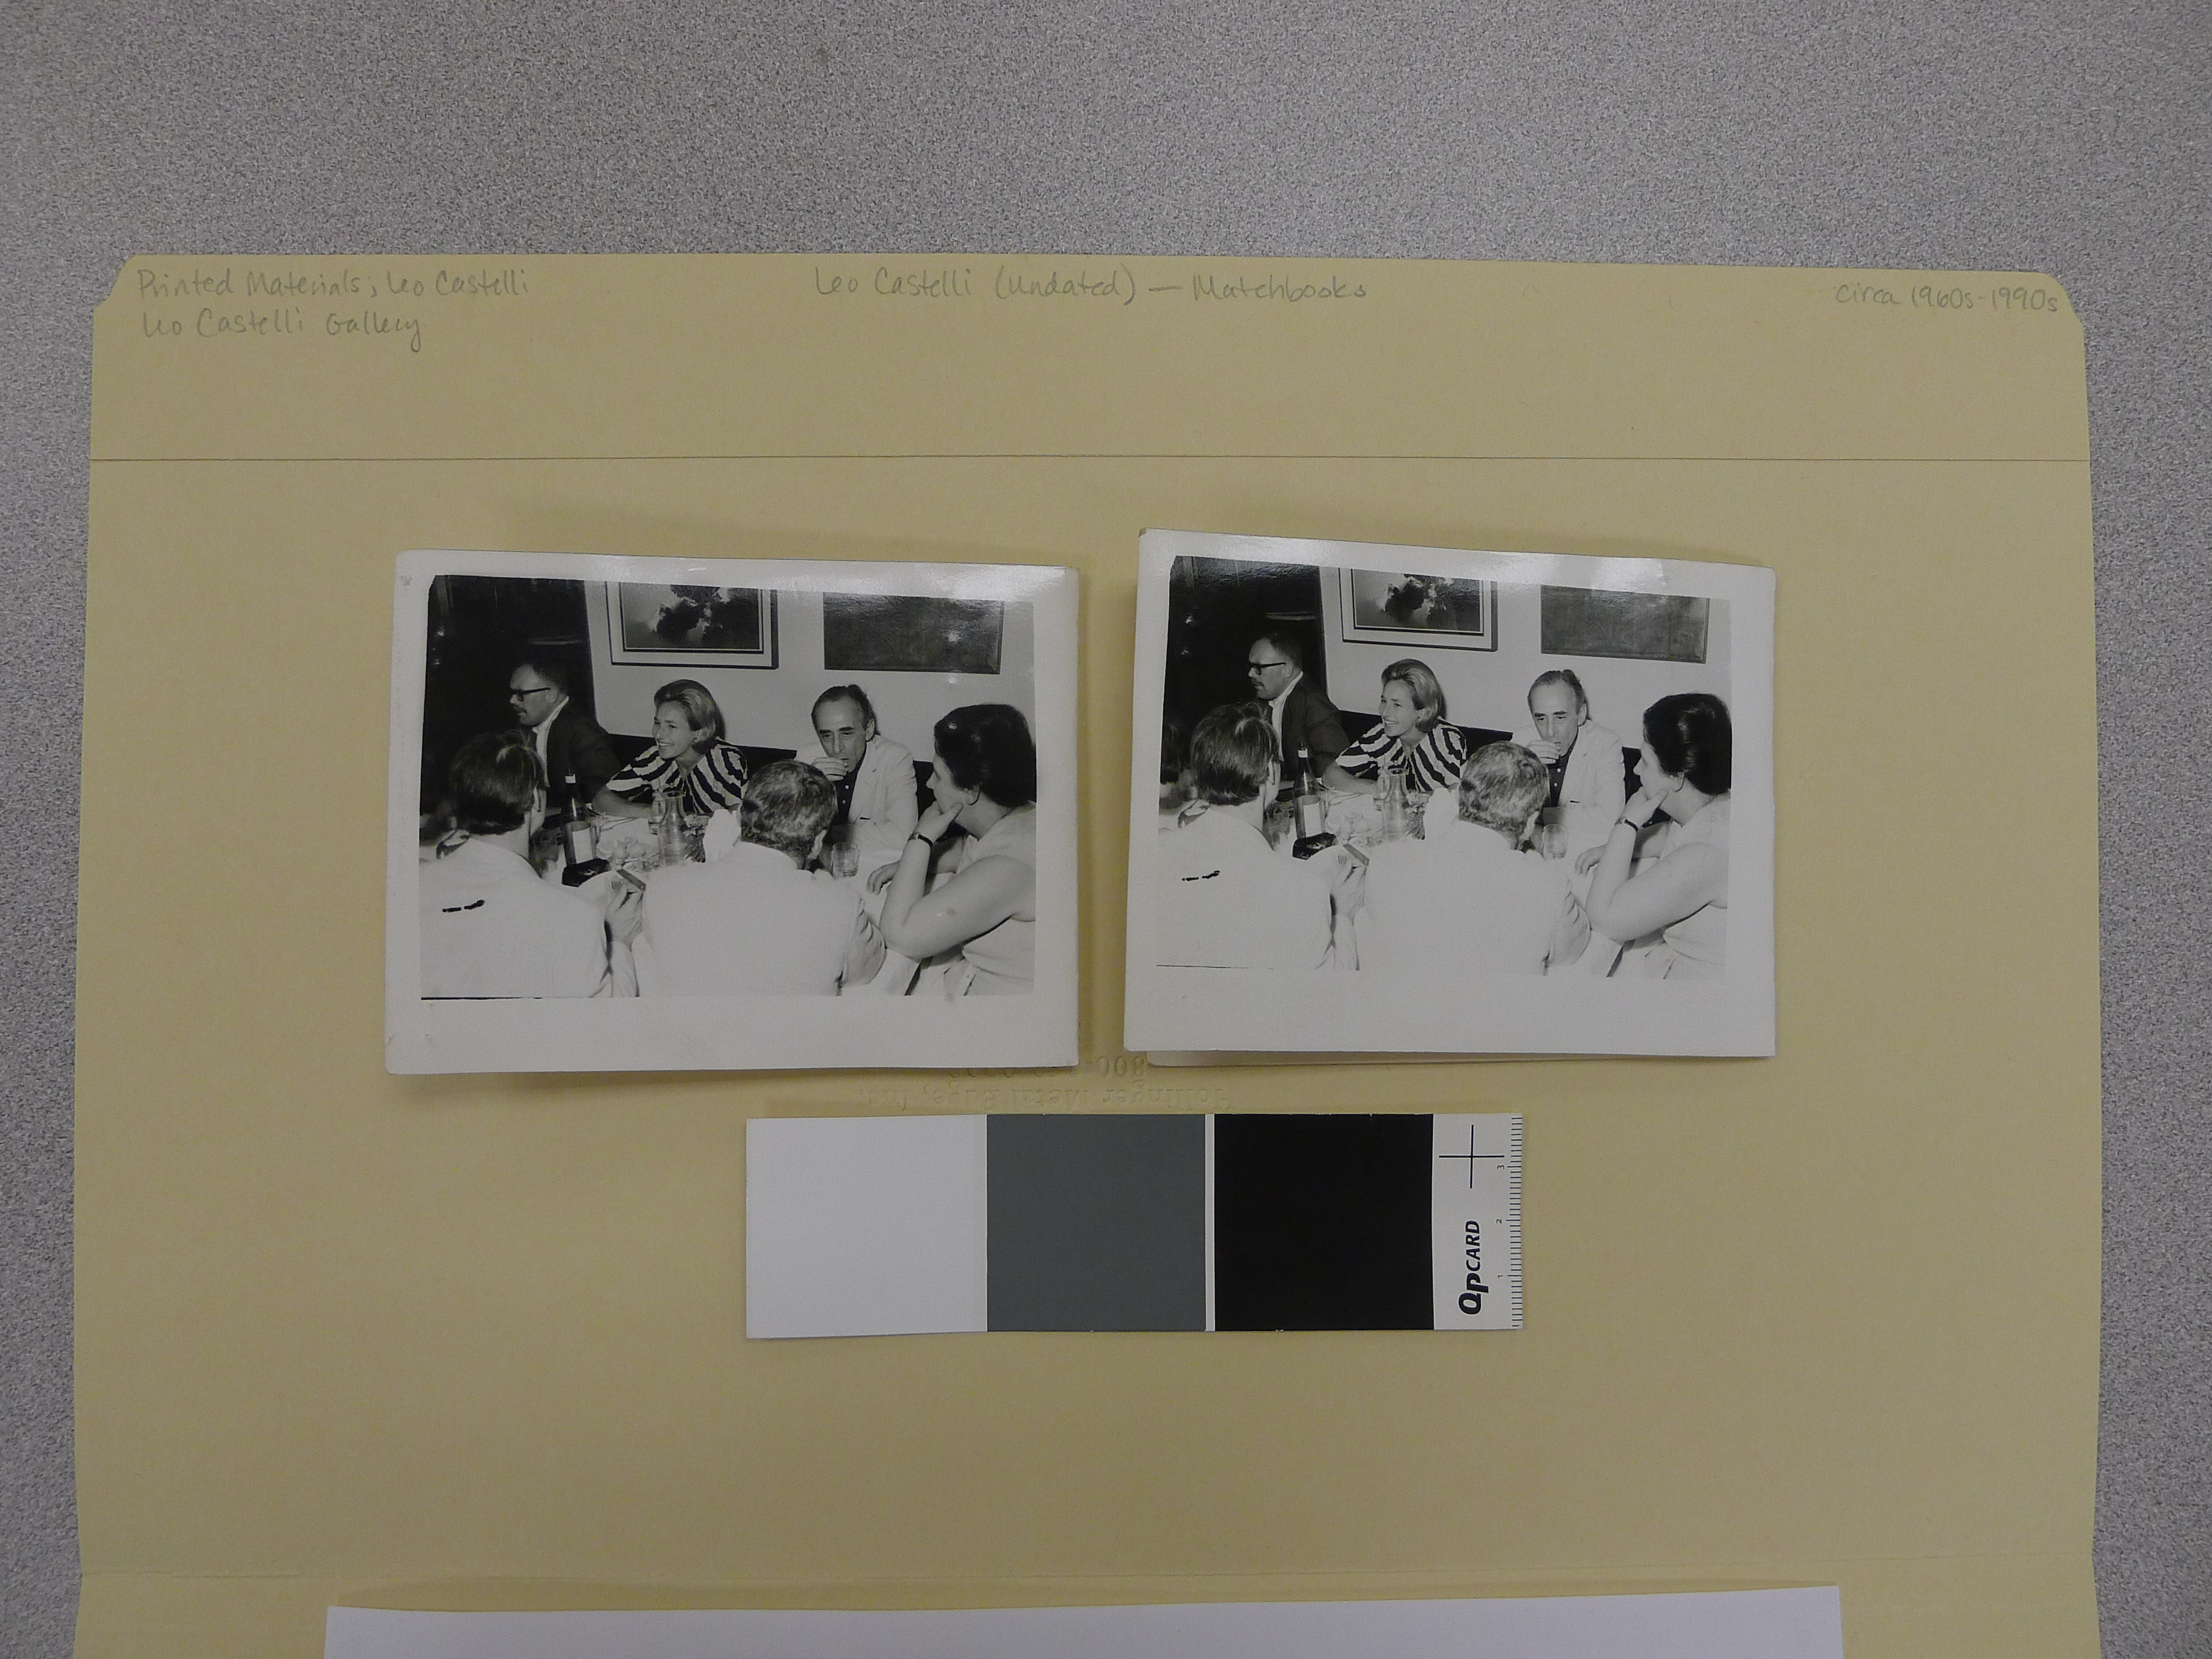 c.1965-7 silver gelatin prints on Agfa paper used as matchbook covers (fronts). Note difference in e